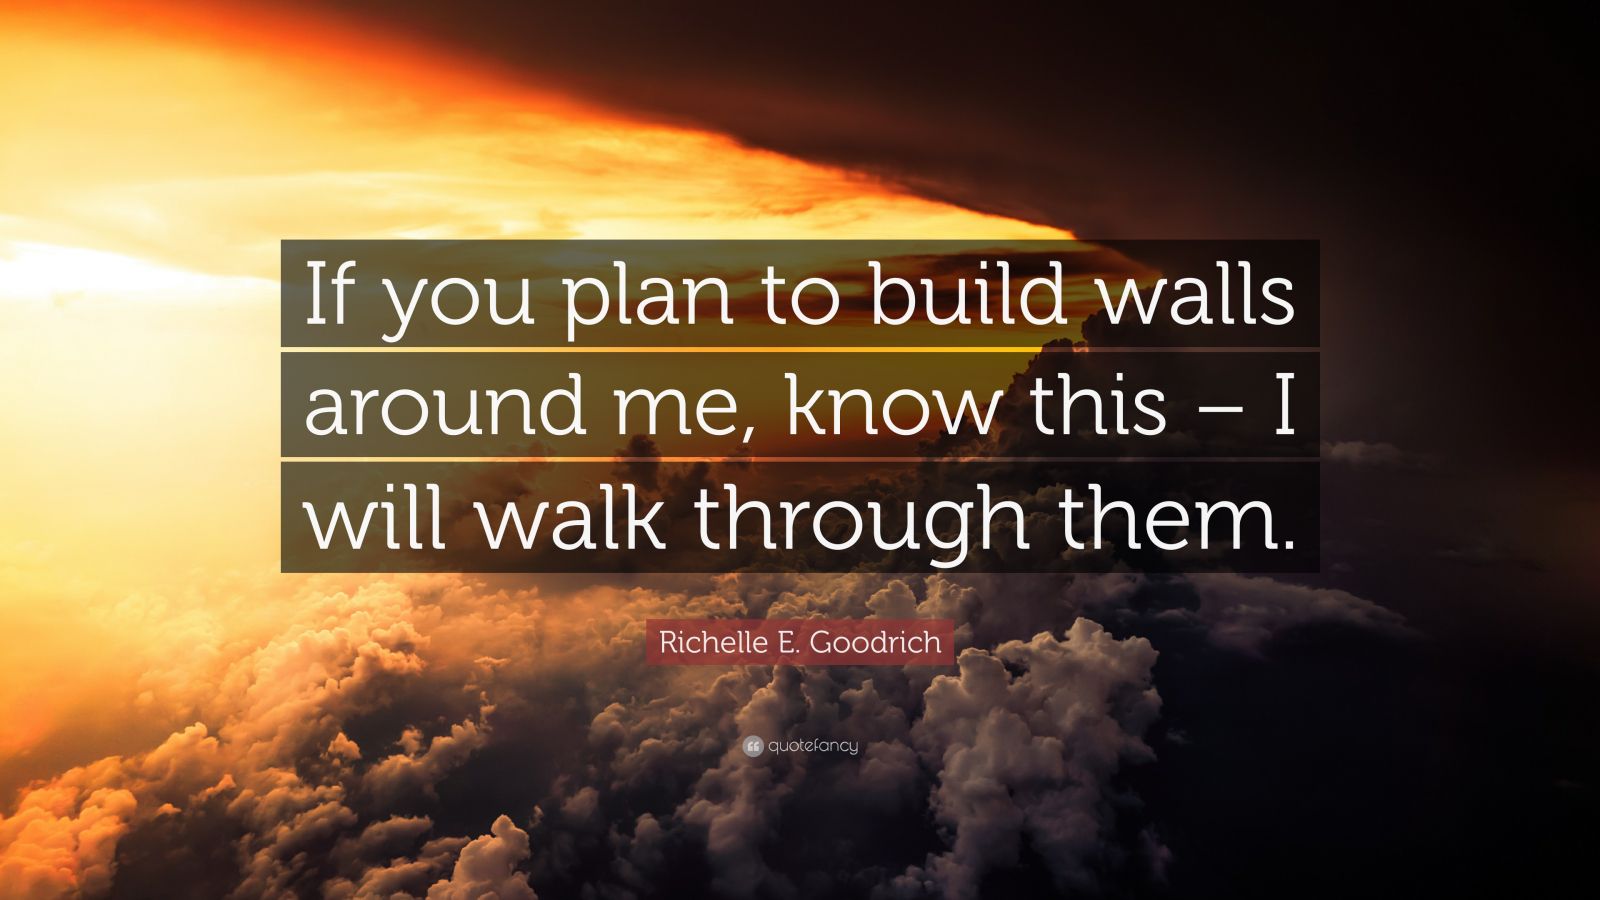 Richelle E. Goodrich Quote: "If you plan to build walls around me, know this - I will walk ...